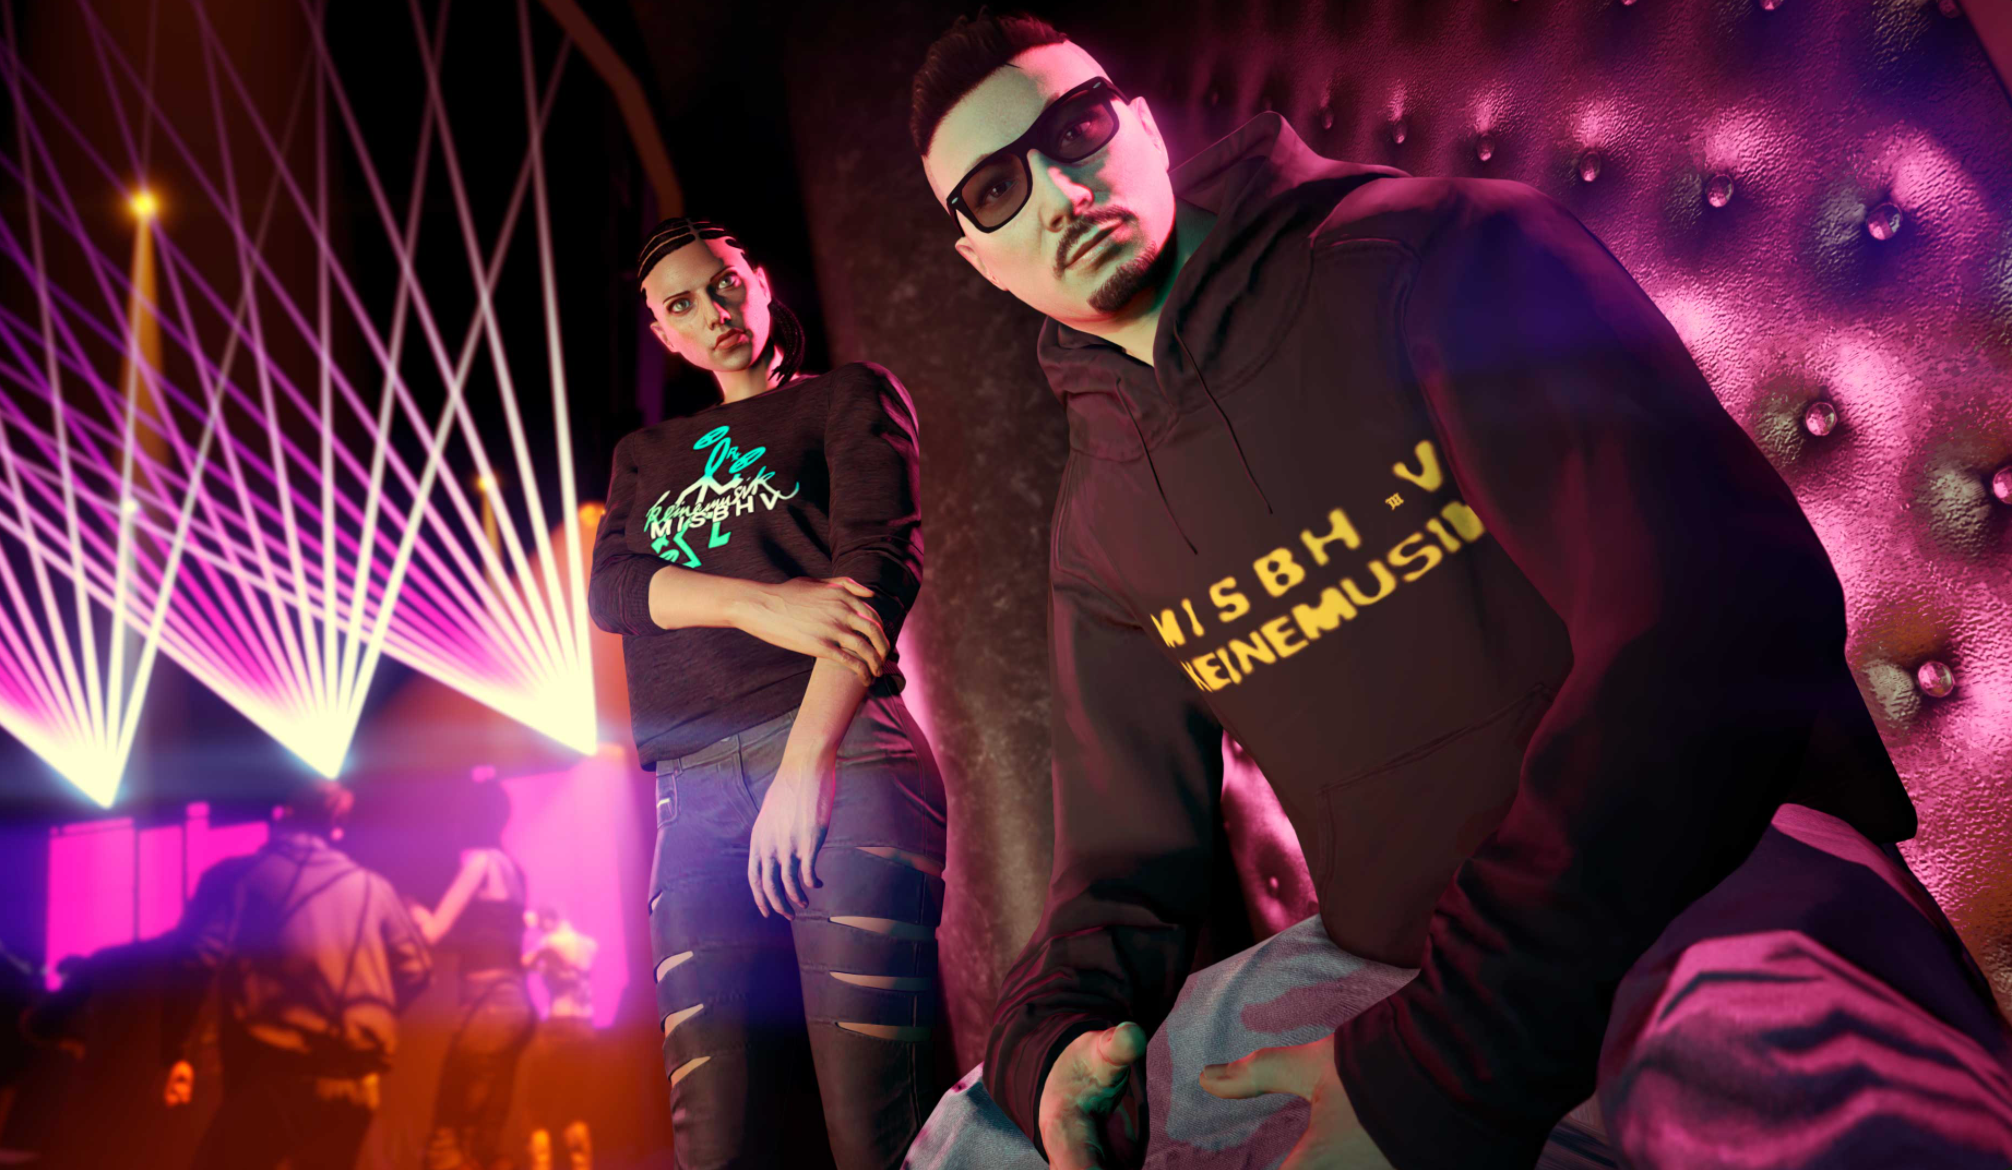 Polish streetwear label MISBHV drew global attention through its partnership with Grand Theft Auto. Photo: Courtesy of Rockstar Games